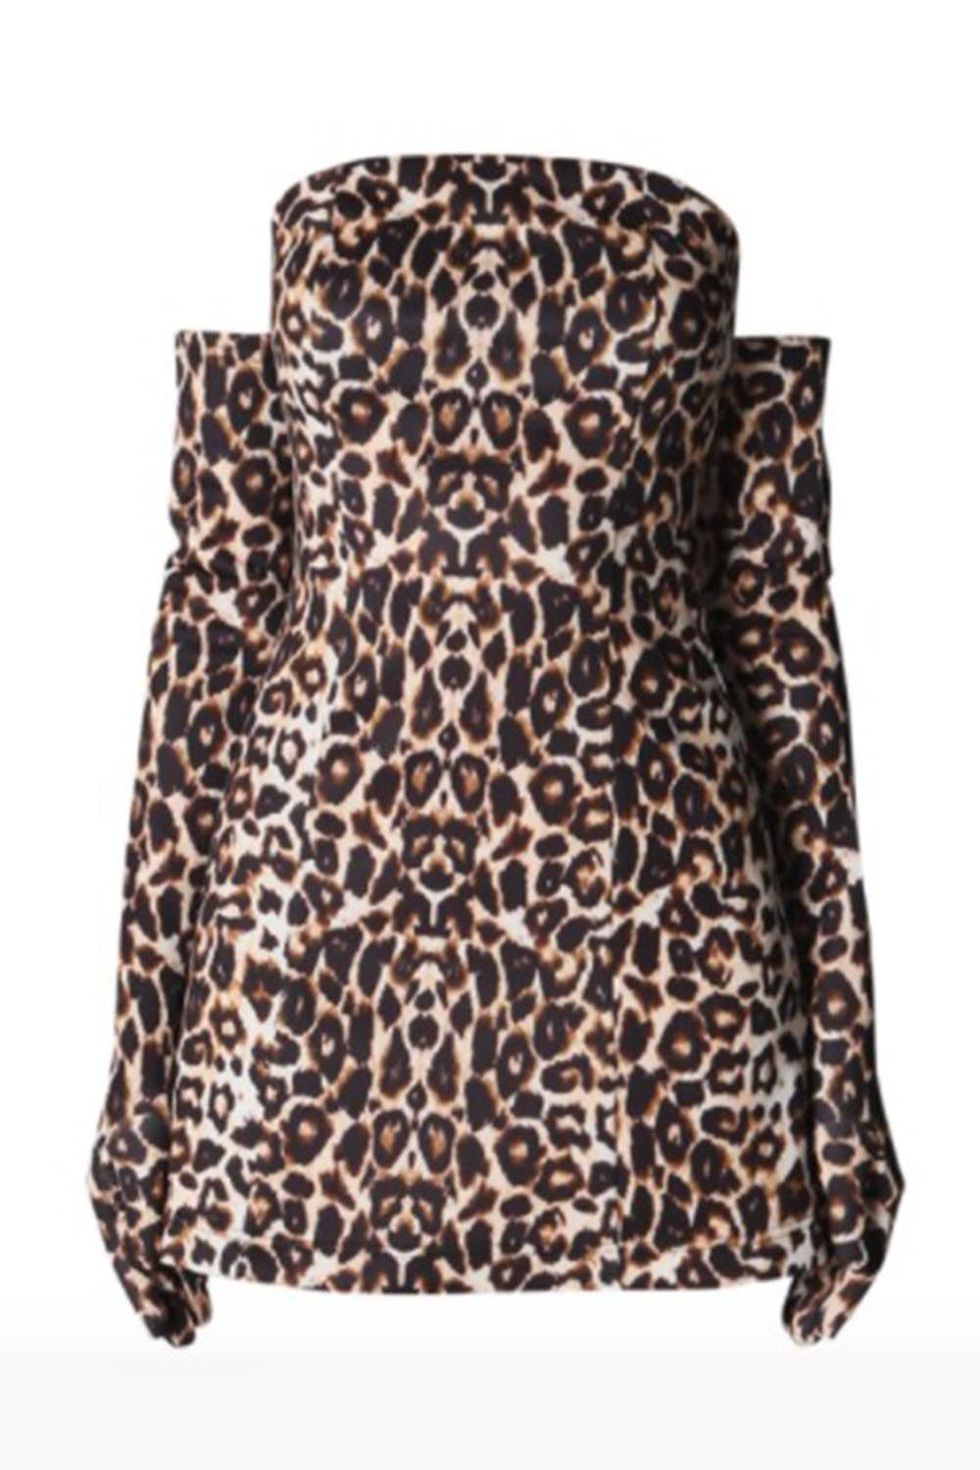 How To Pick A Leopard Print Shirt Dress For The Office